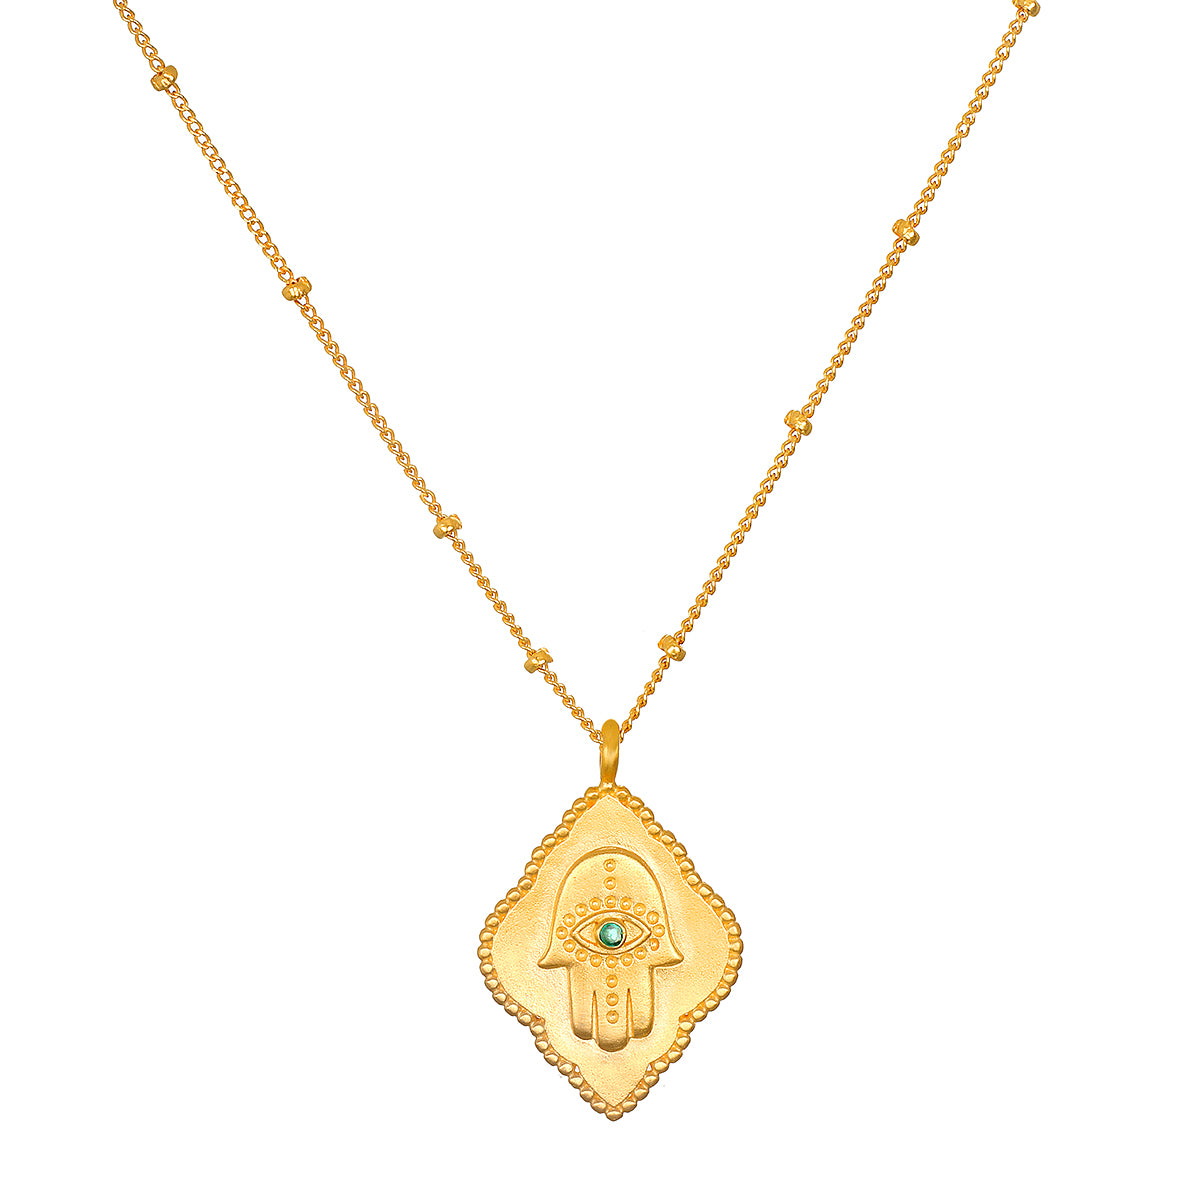 Hamsa Hand Necklace  9ct Gold - Gear Jewellers